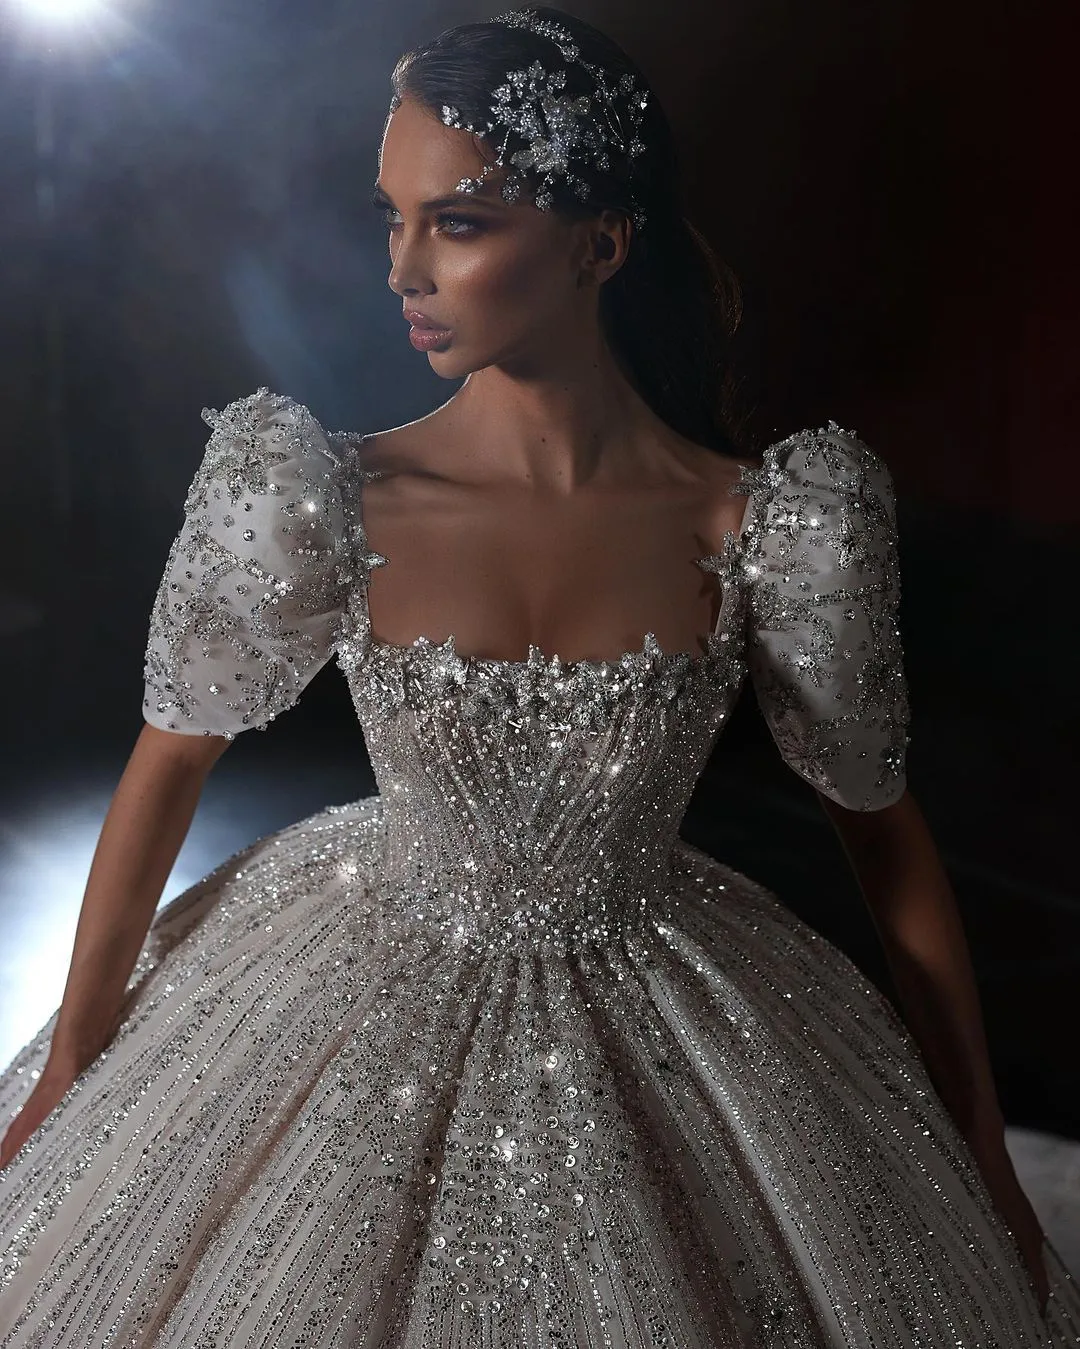 Luxurious Ball Gown Wedding Dresses Square Short Sleeves Shining Beading Applicant Layered Stain Tulle Chapel Gown Custom Made Bridal Dress Vestidos De Novia